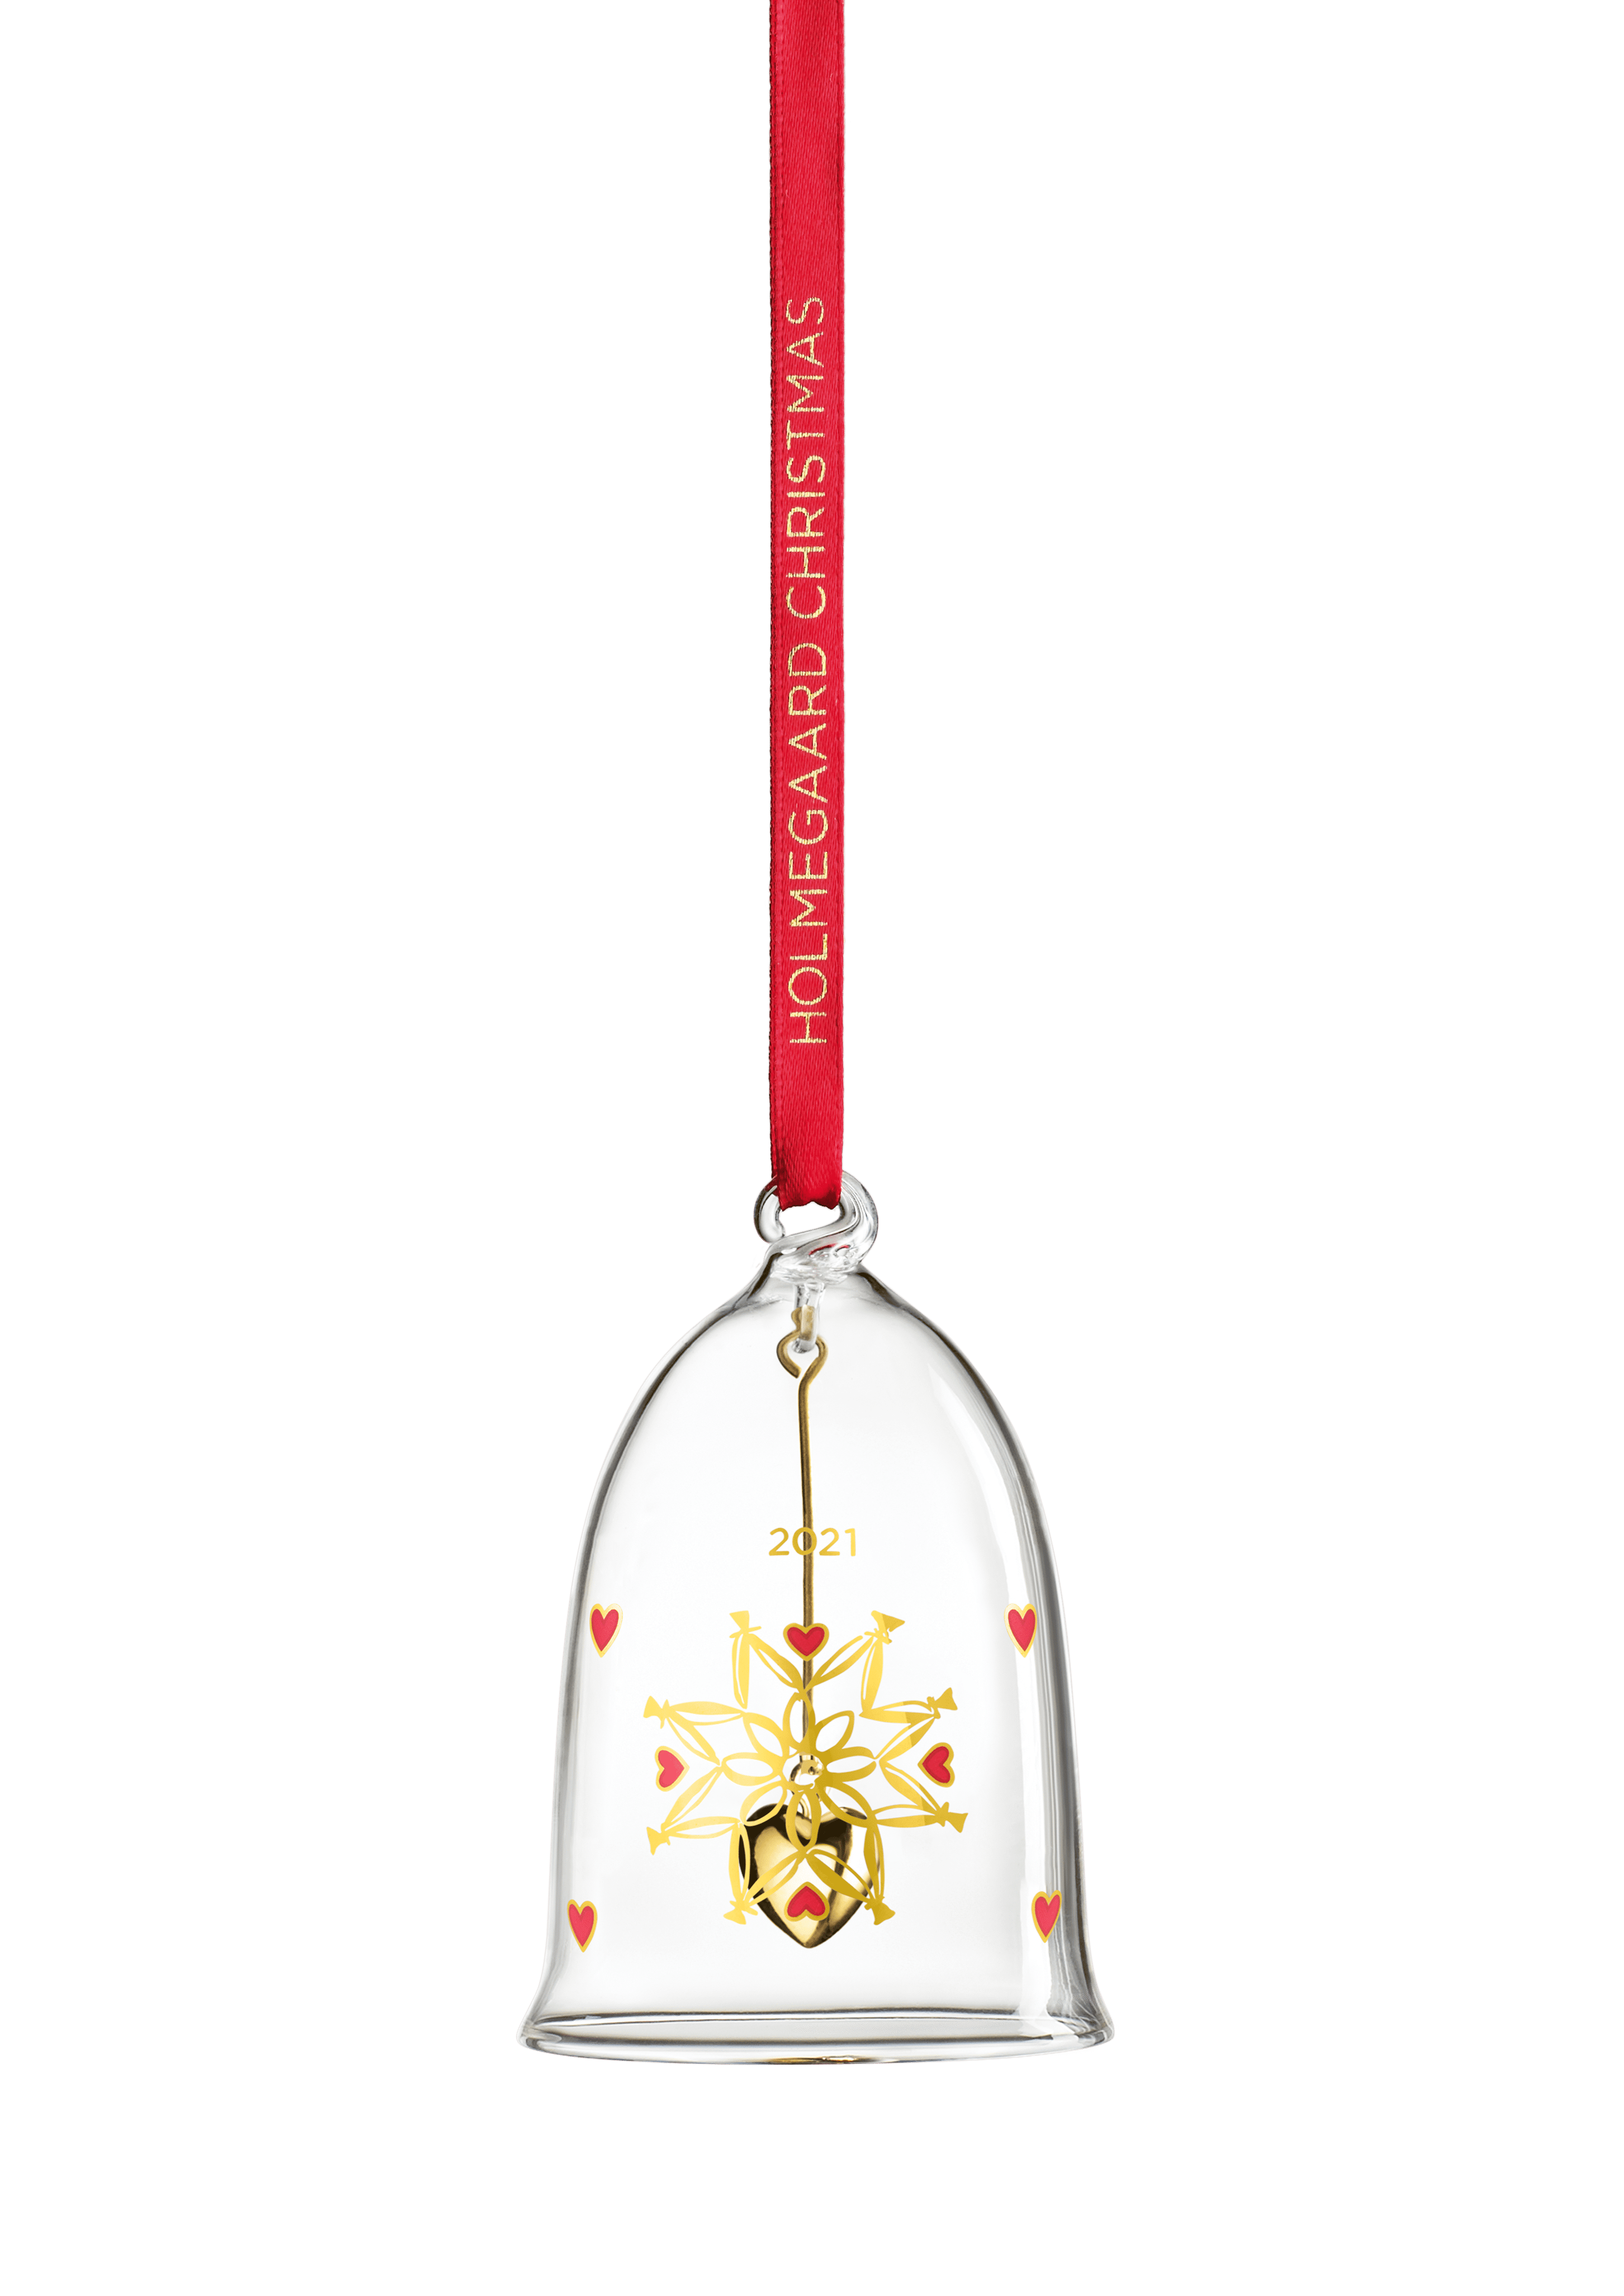 Annual Christmas Bell 2021 small